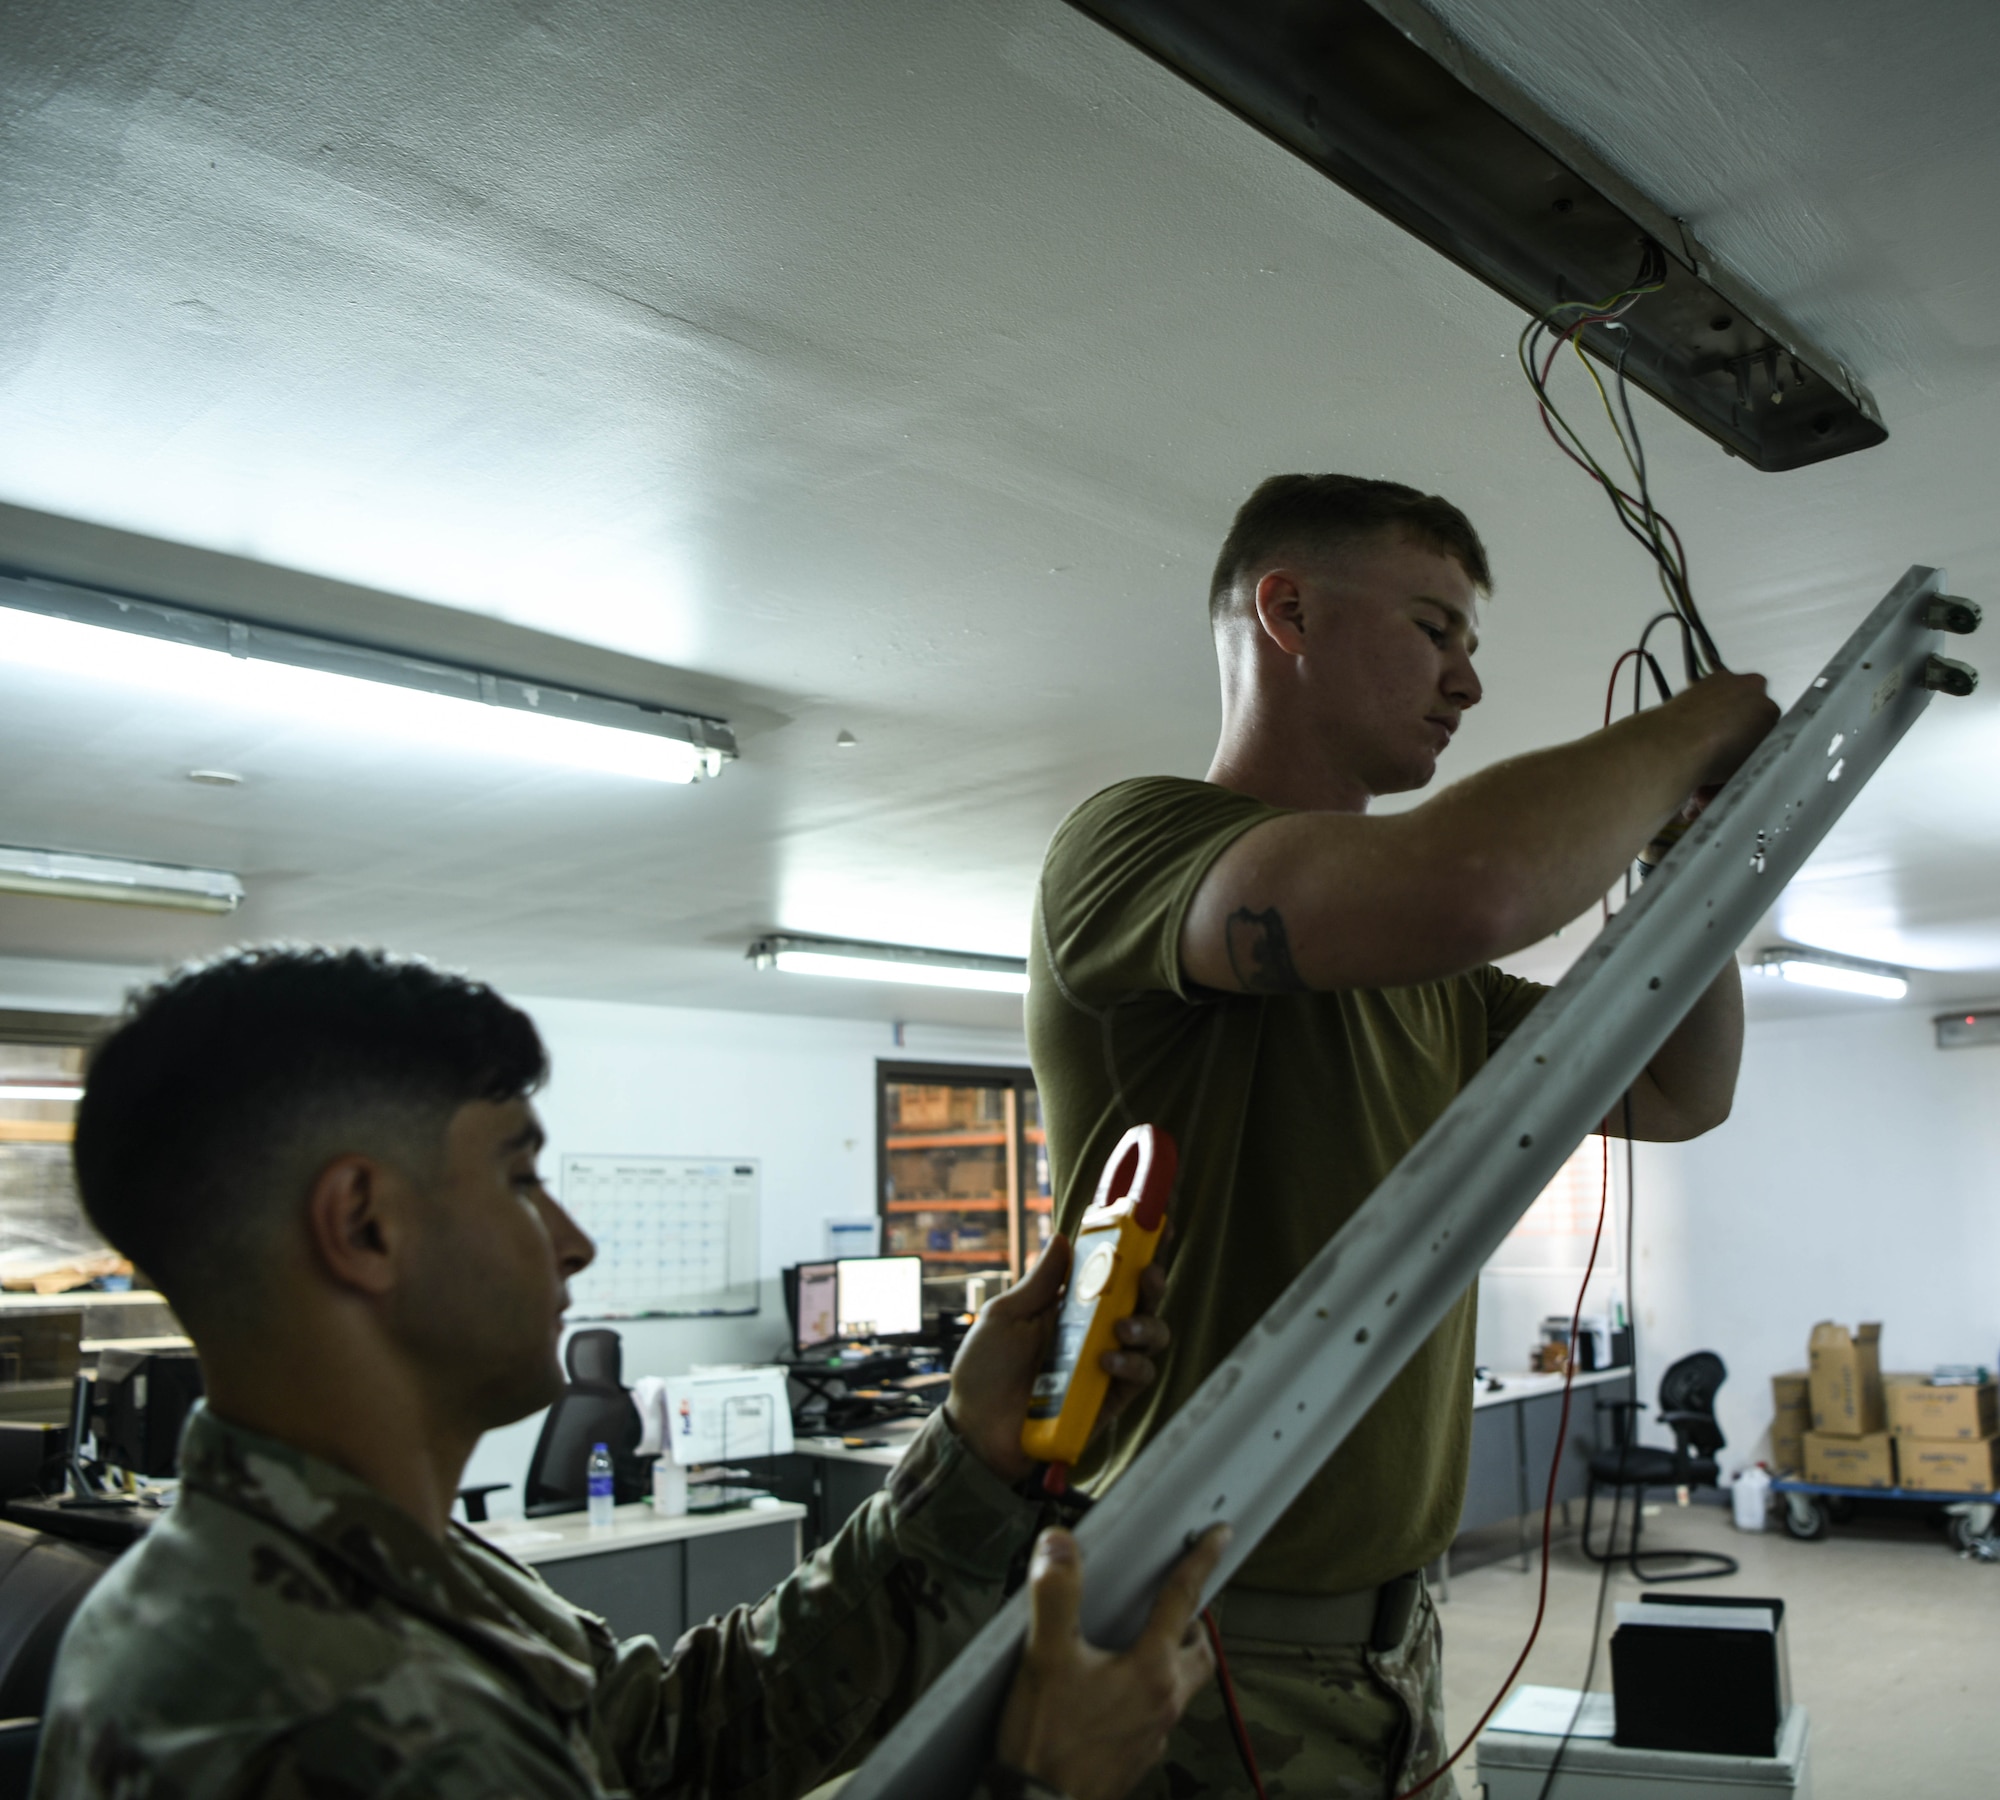 Staff Sgt. Seth Sammons (left) and Senior Airman Joshua Hancock, both members of the 380th Expeditionary Civil Engineer Squadron, repair a light fixture August 11, 2020 here.